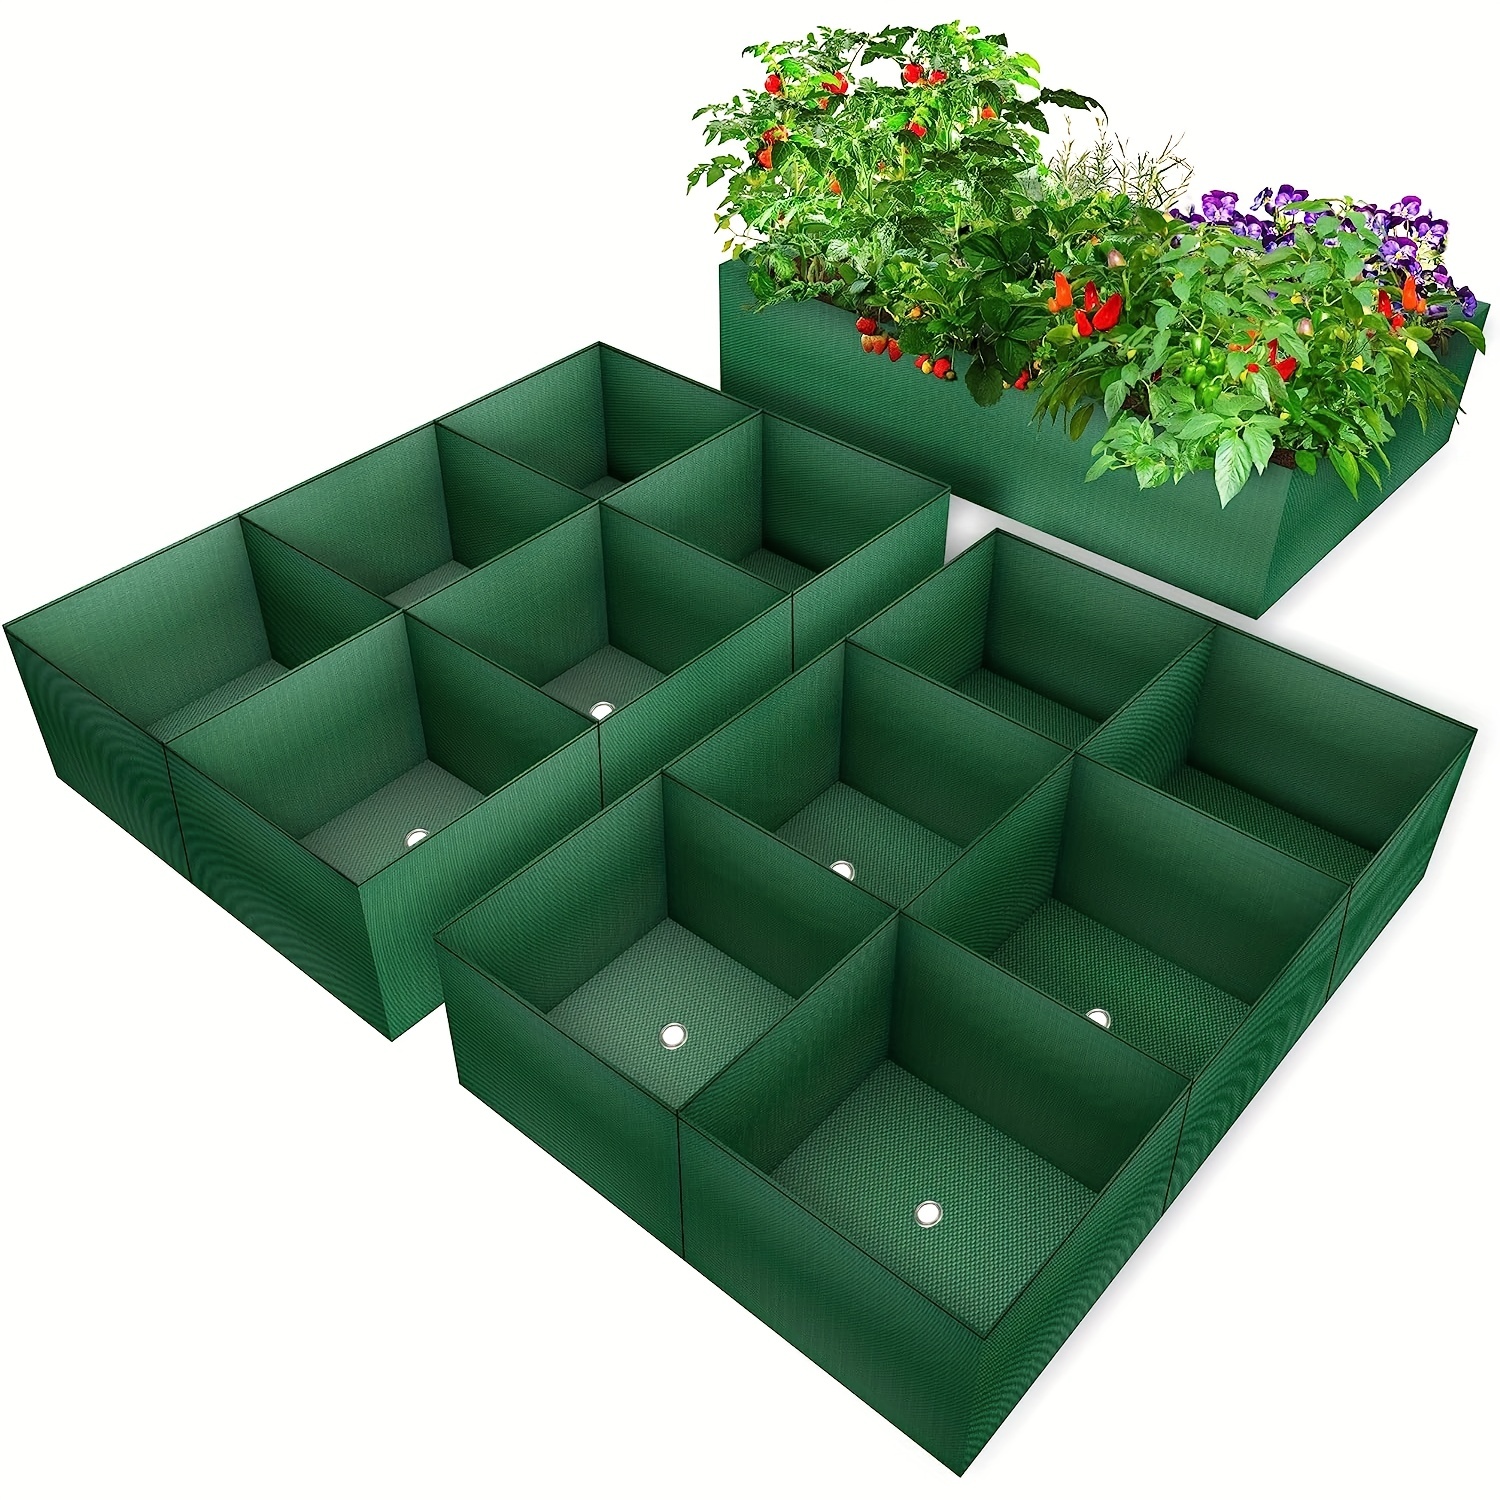 

2pcs 35 Gallon Elevated Garden Bed, Large Woven Species Planting Bag, Pe Garden Planting Bag With 6 Compartments, Breathable Tomato, Chili, Outdoor Vegetables, Herb Flower Flowerpot With Drain Holes